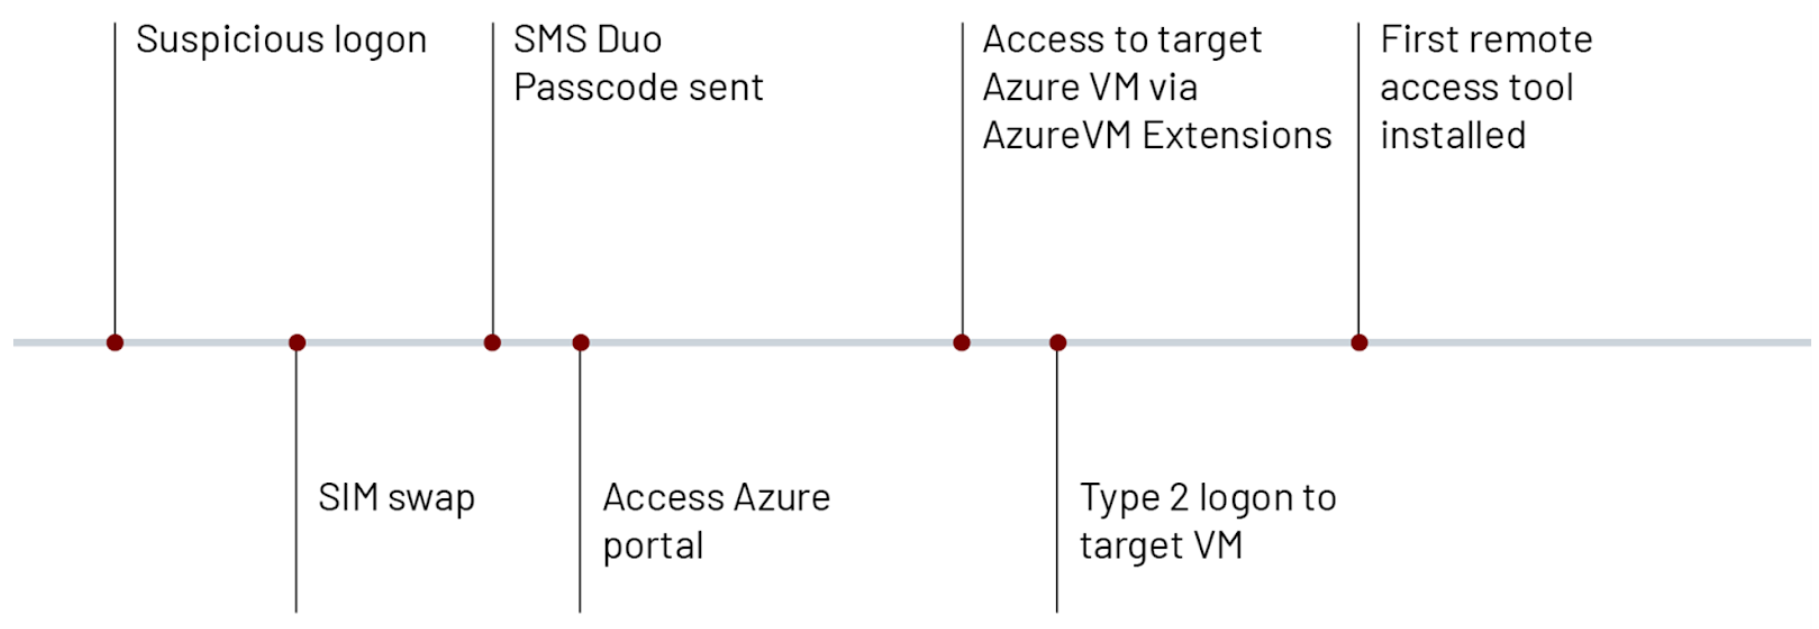 Example of attacker attack path observed by Mandiant